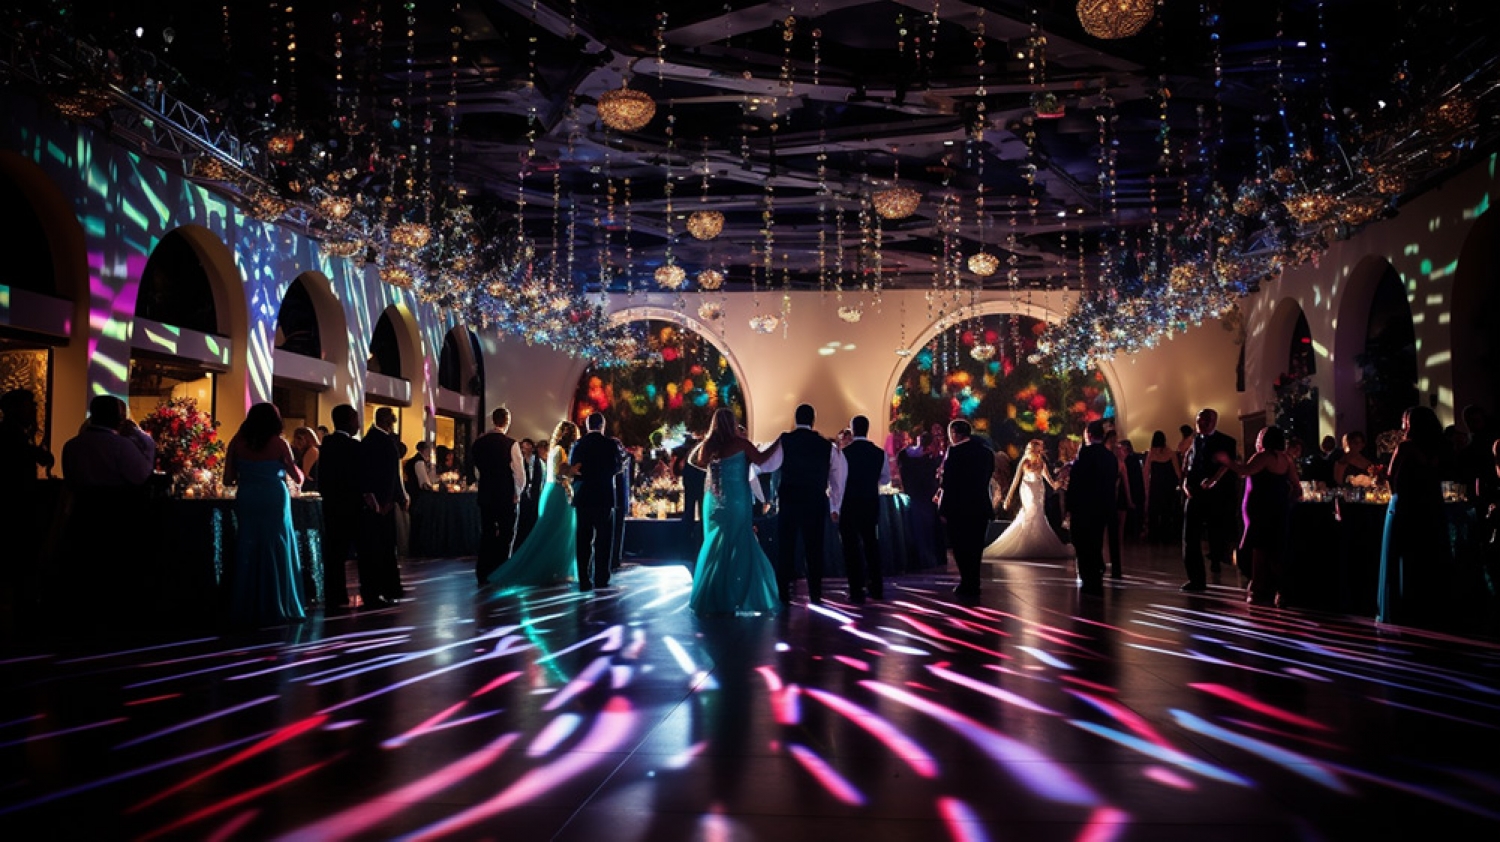 How Entertainment Sets The Tone: From Weddings To Corporate Events